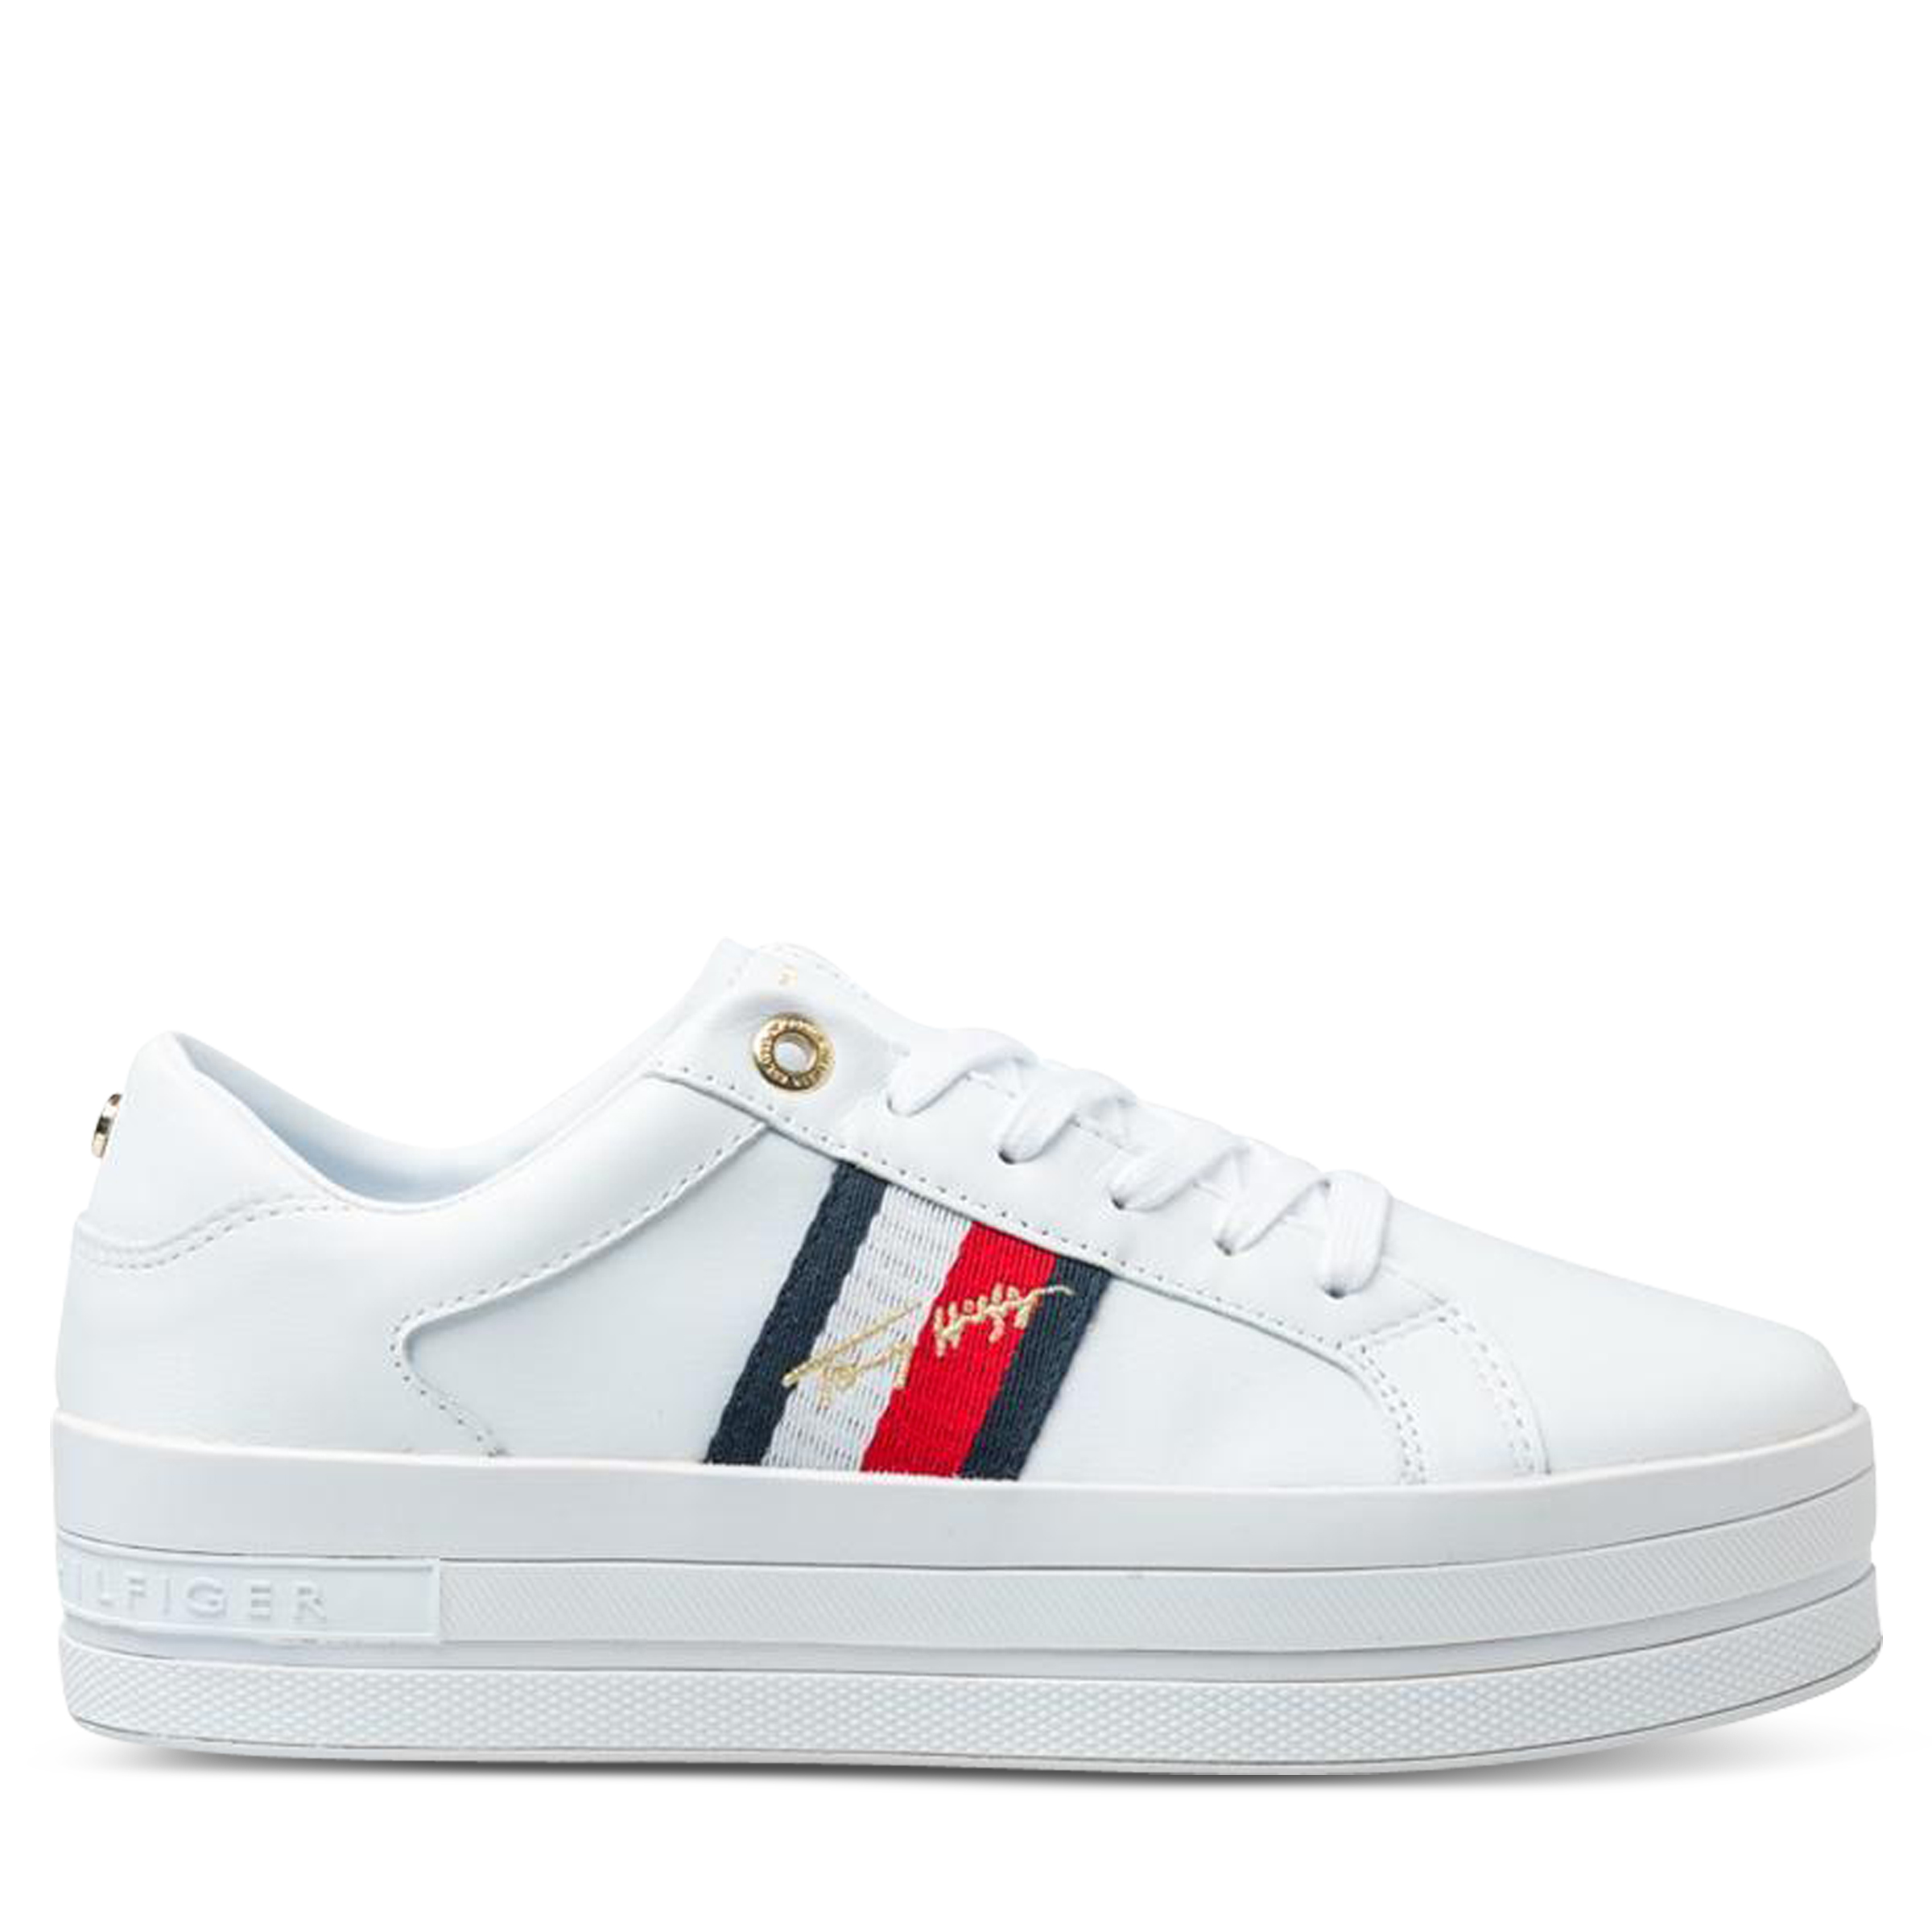 Tommy Hilfiger Shoes For Women | Platypus Shoes